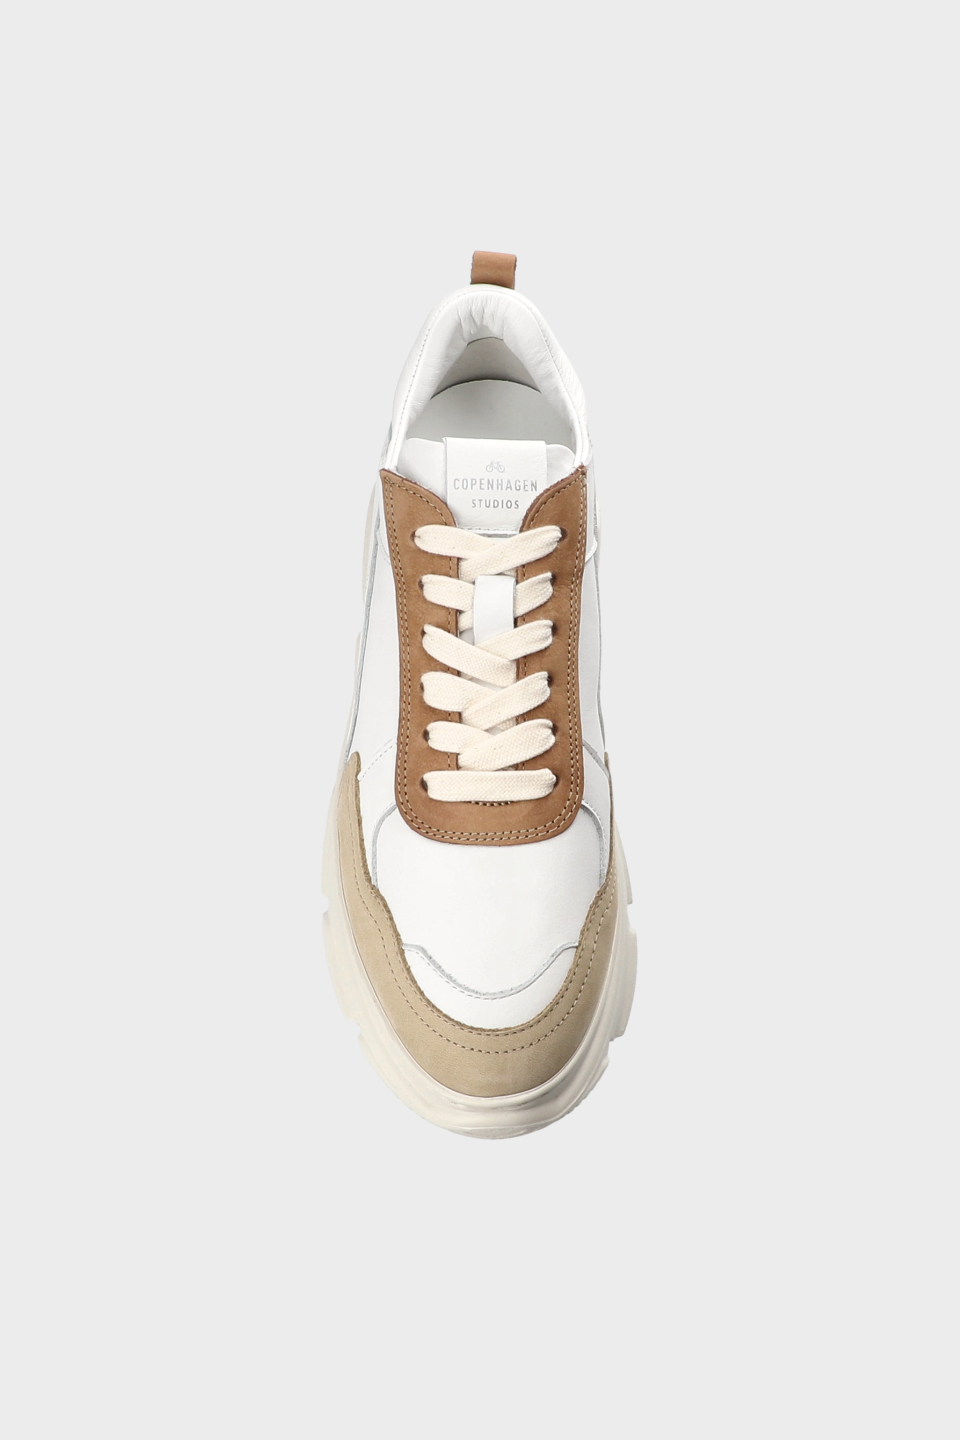 CPH40 leather mix off white/nut - alternative 1